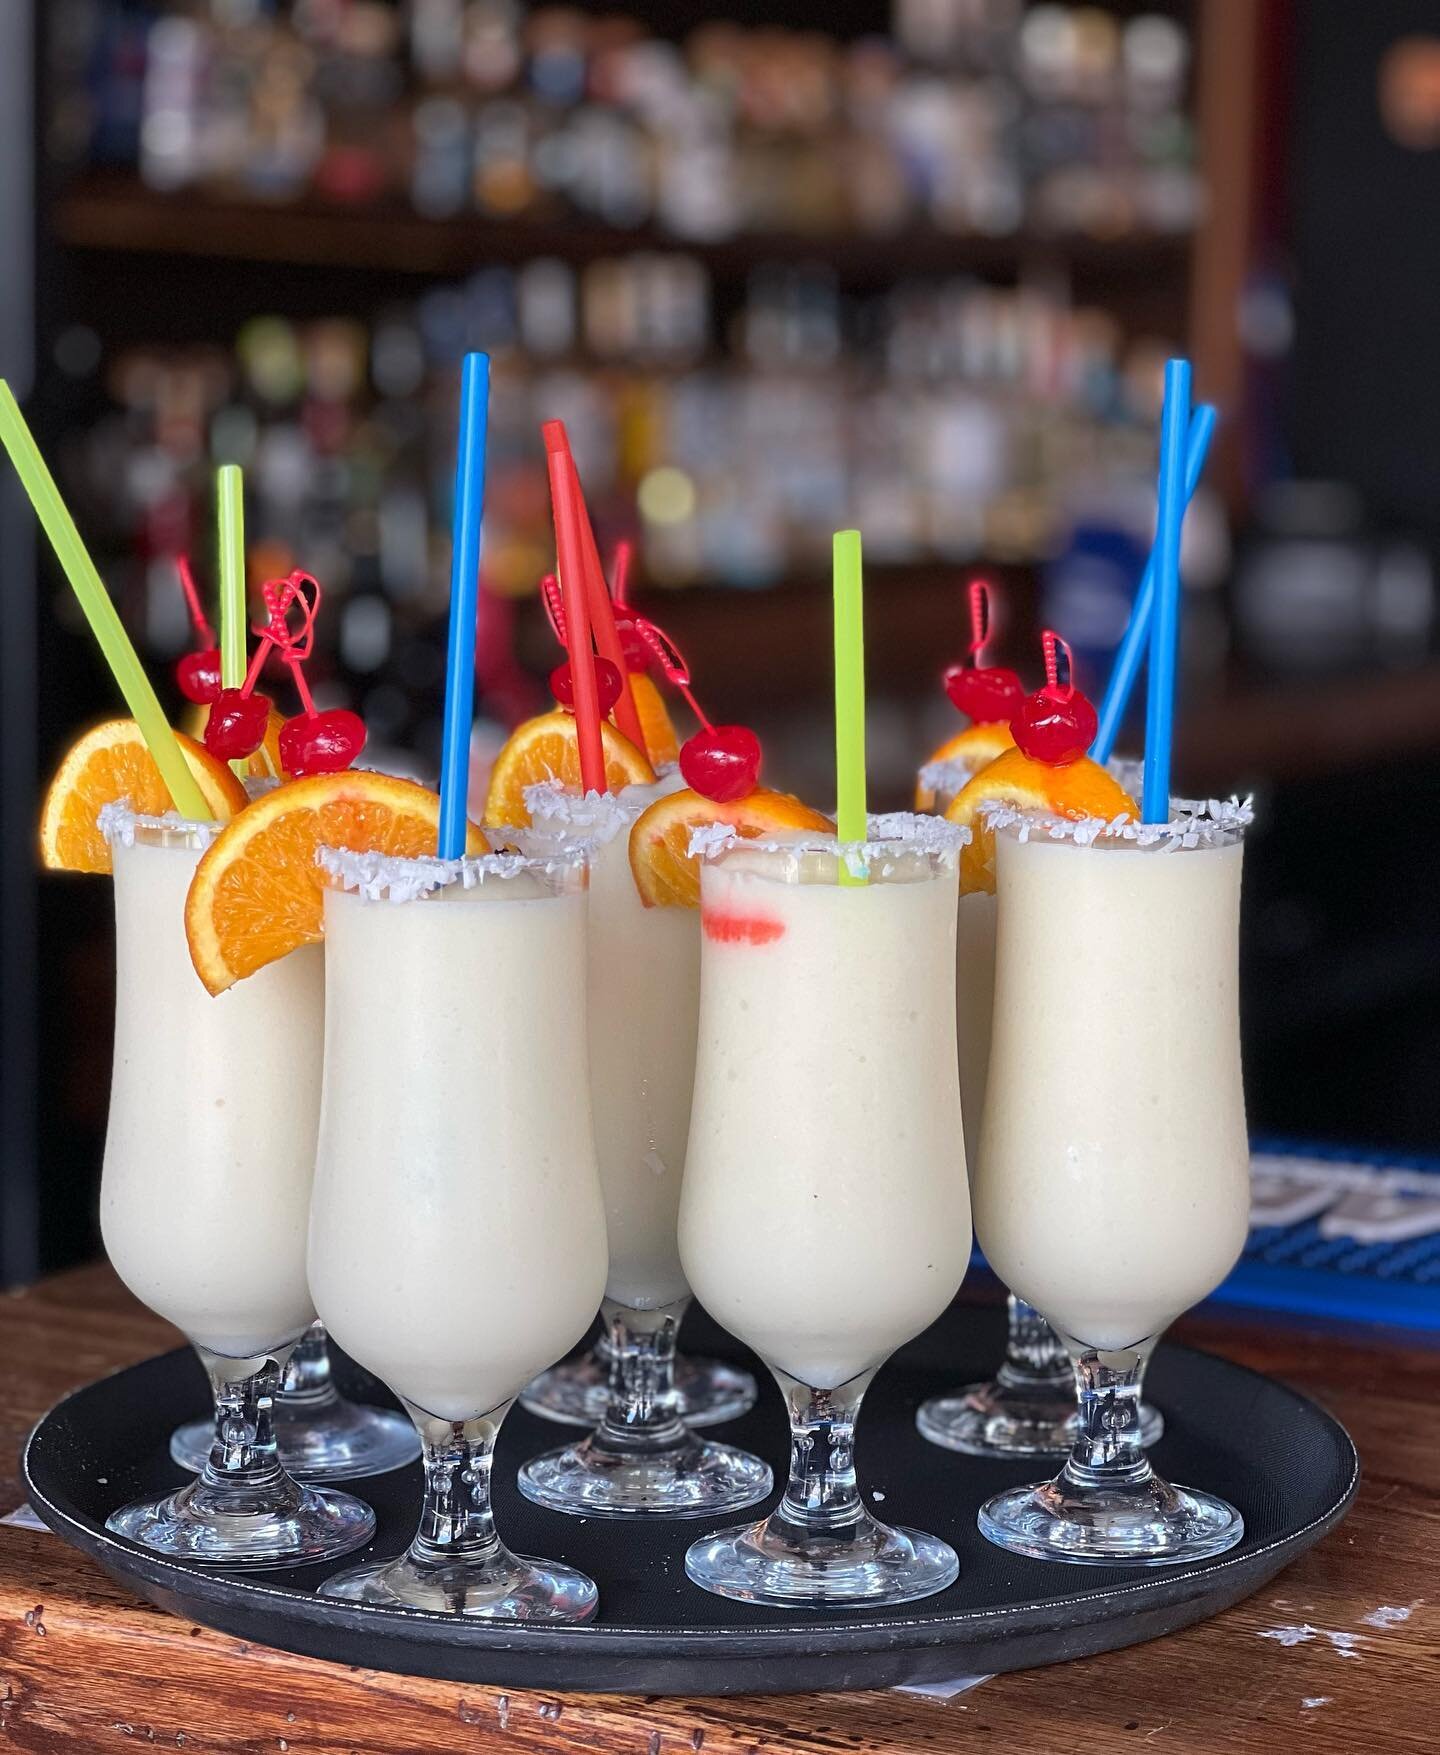 🍍If you like pi&ntilde;a colada&hellip;🎶🍍
Today is&hellip;#nationalpinacoladaday ‼️
.
.
#pi&ntilde;a #rum #pinacolada #yummycocktails #pineapplerum #summercocktails #patiovibes #mexicanfood #ilovetacontequila #summertime #niagaratourism #niagarafo